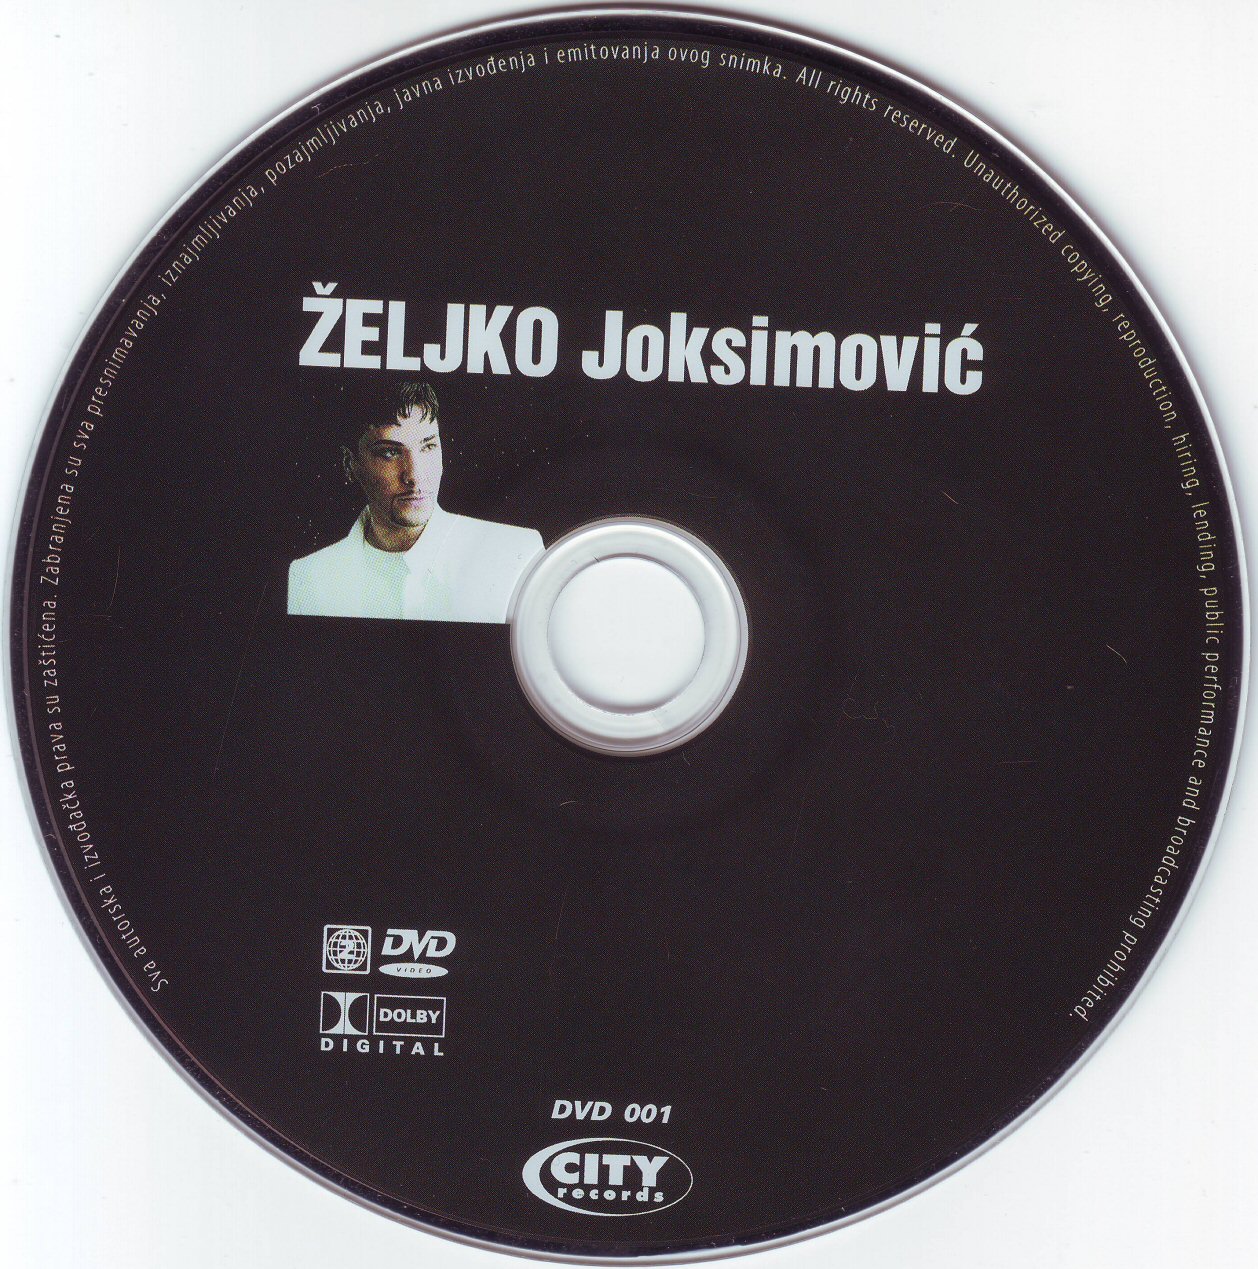 Click to view full size image -  DVD Cover - 0-9 - DVD - ZELJKO JOKSIMOVIC  - KONCERT - CD - DVD - ZELJKO JOKSIMOVIC  - KONCERT - CD.jpg